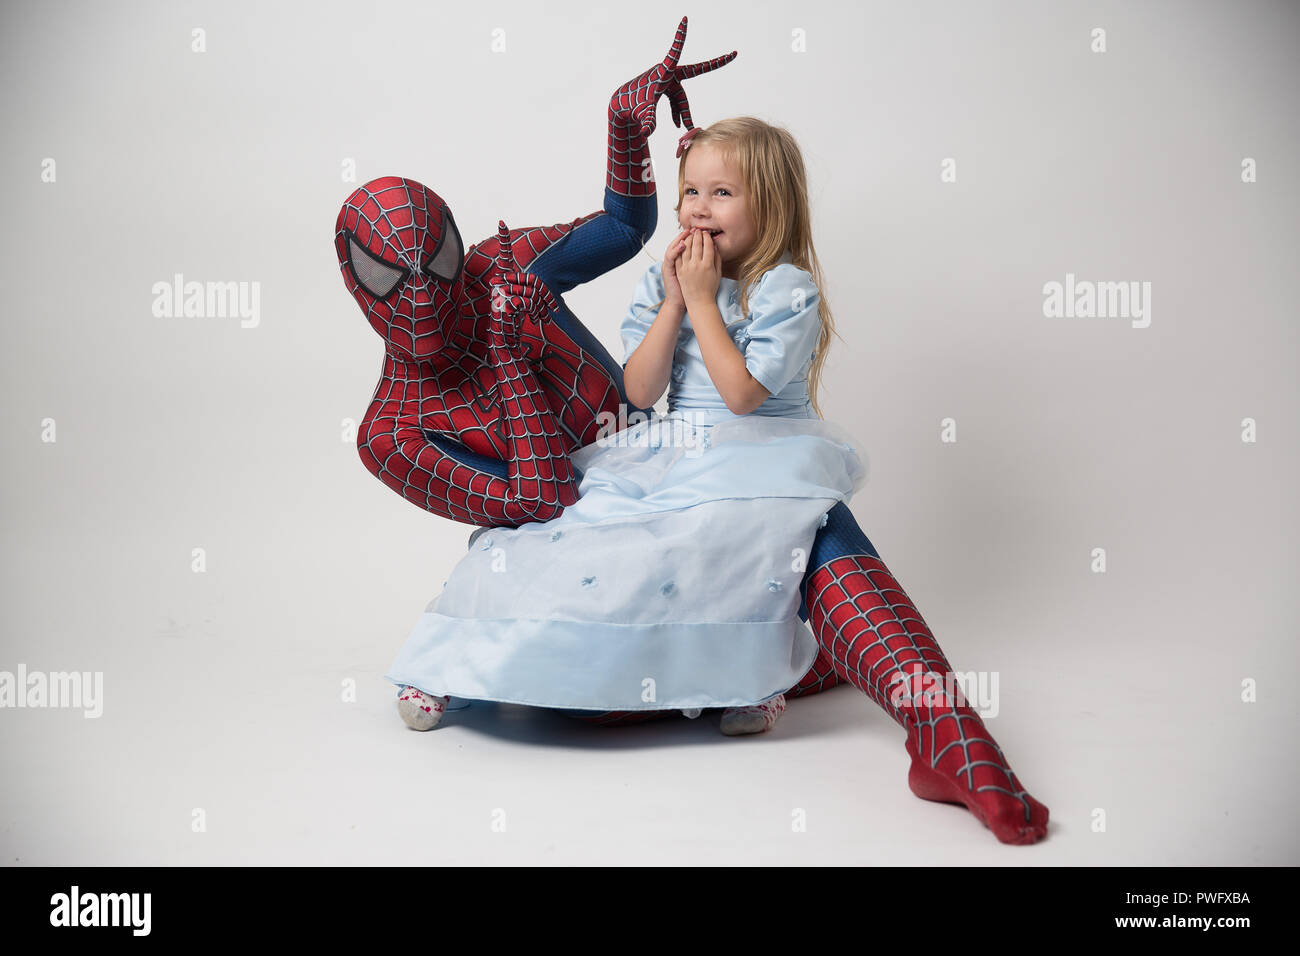 Israel, Tel Aviv October 14, 2018. The spiderman is holding a little girl in his arms. A man in a spiderman suit came to congratulate the child on his birthday. Spiderman Costume Rental. Stock Photo